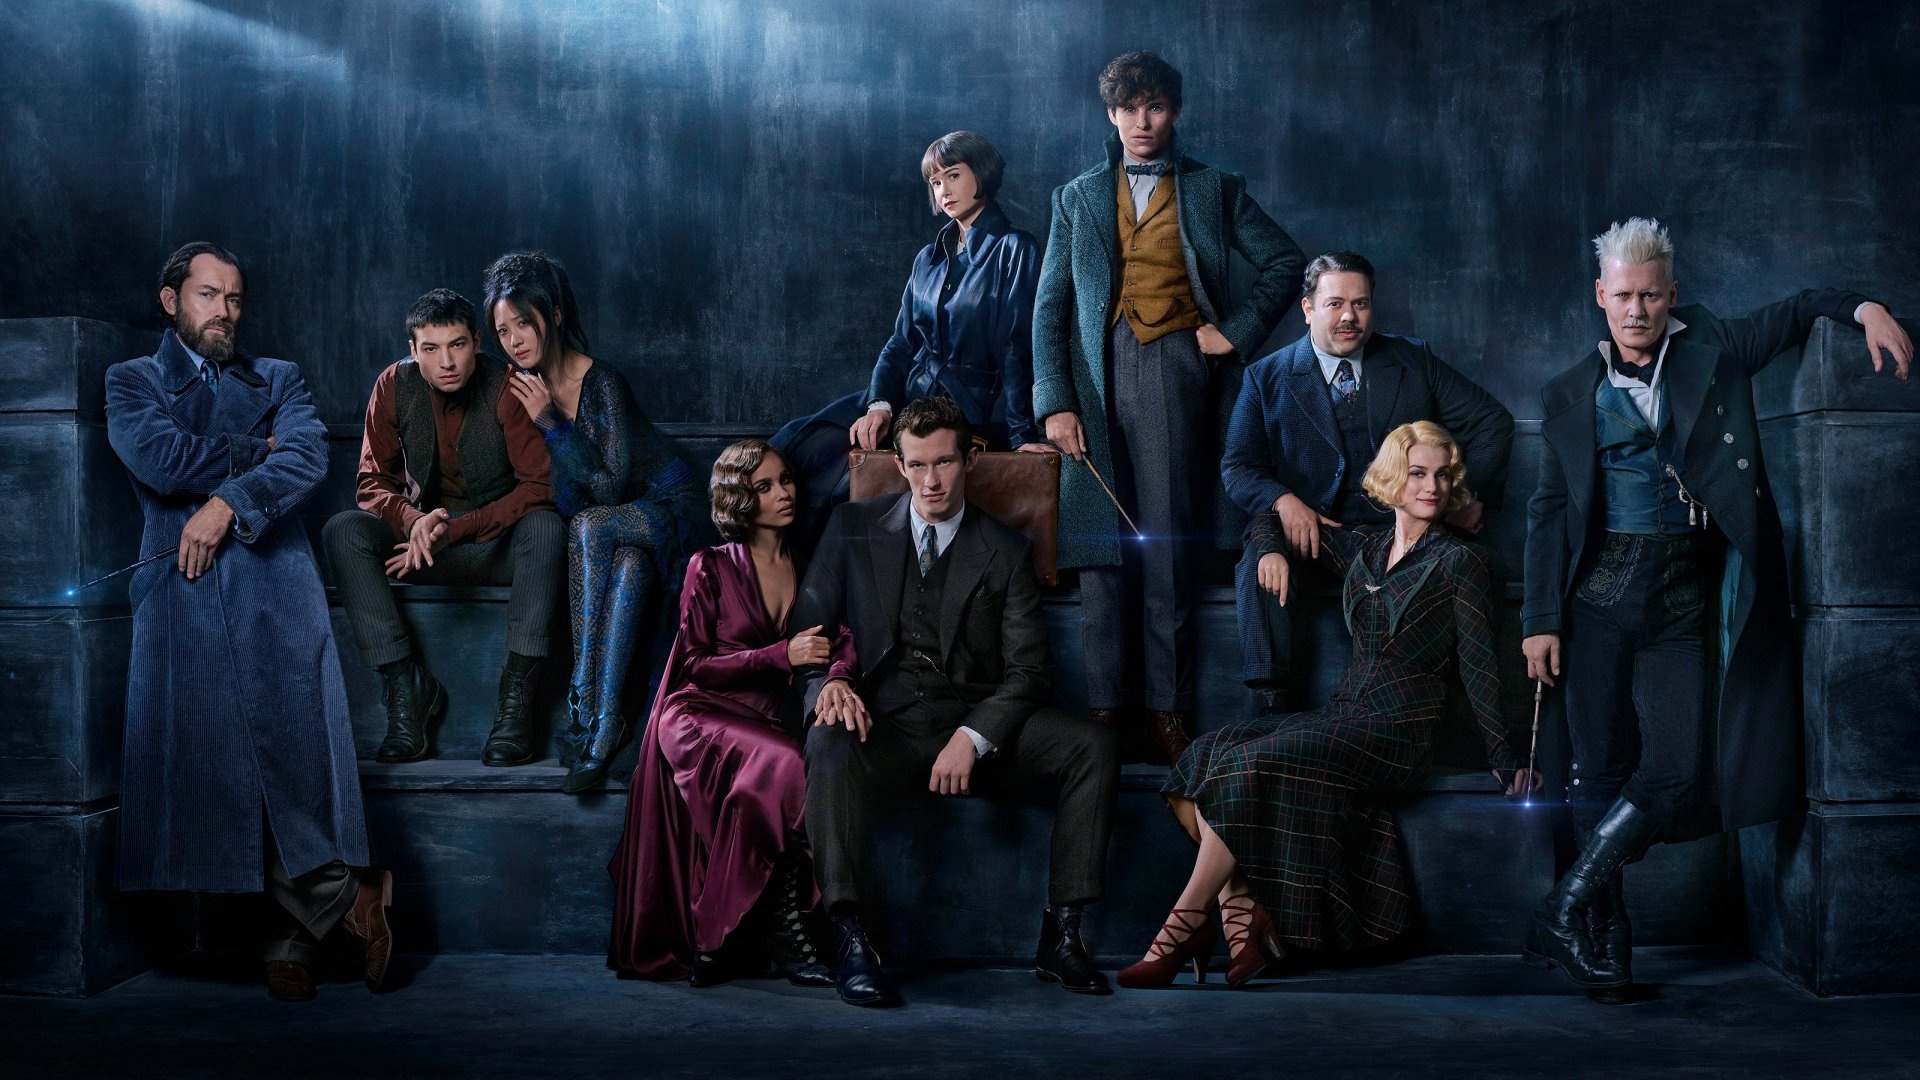 Crimes of Grindelwald, HD wallpapers, High-quality images, Free download, 1920x1080 Full HD Desktop